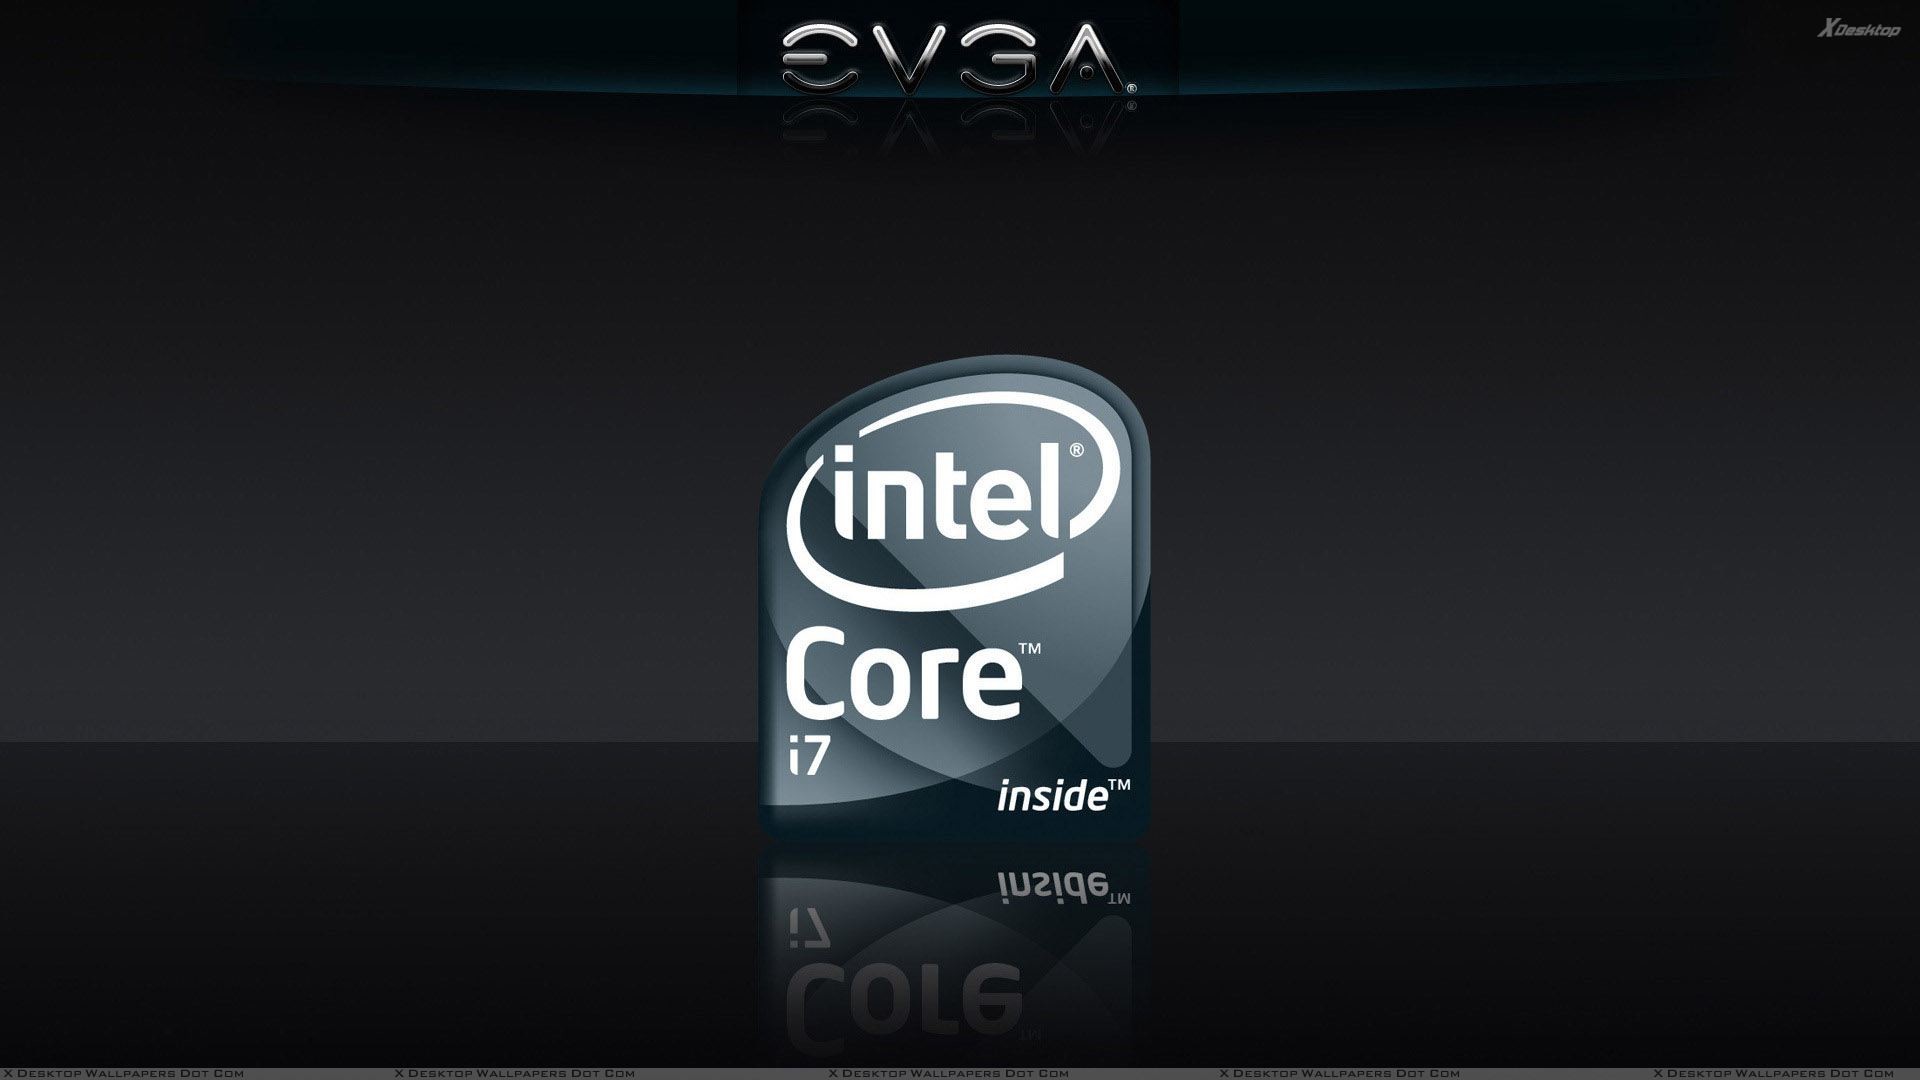 1920x1080 You are viewing wallpaper titled "EVGA ...